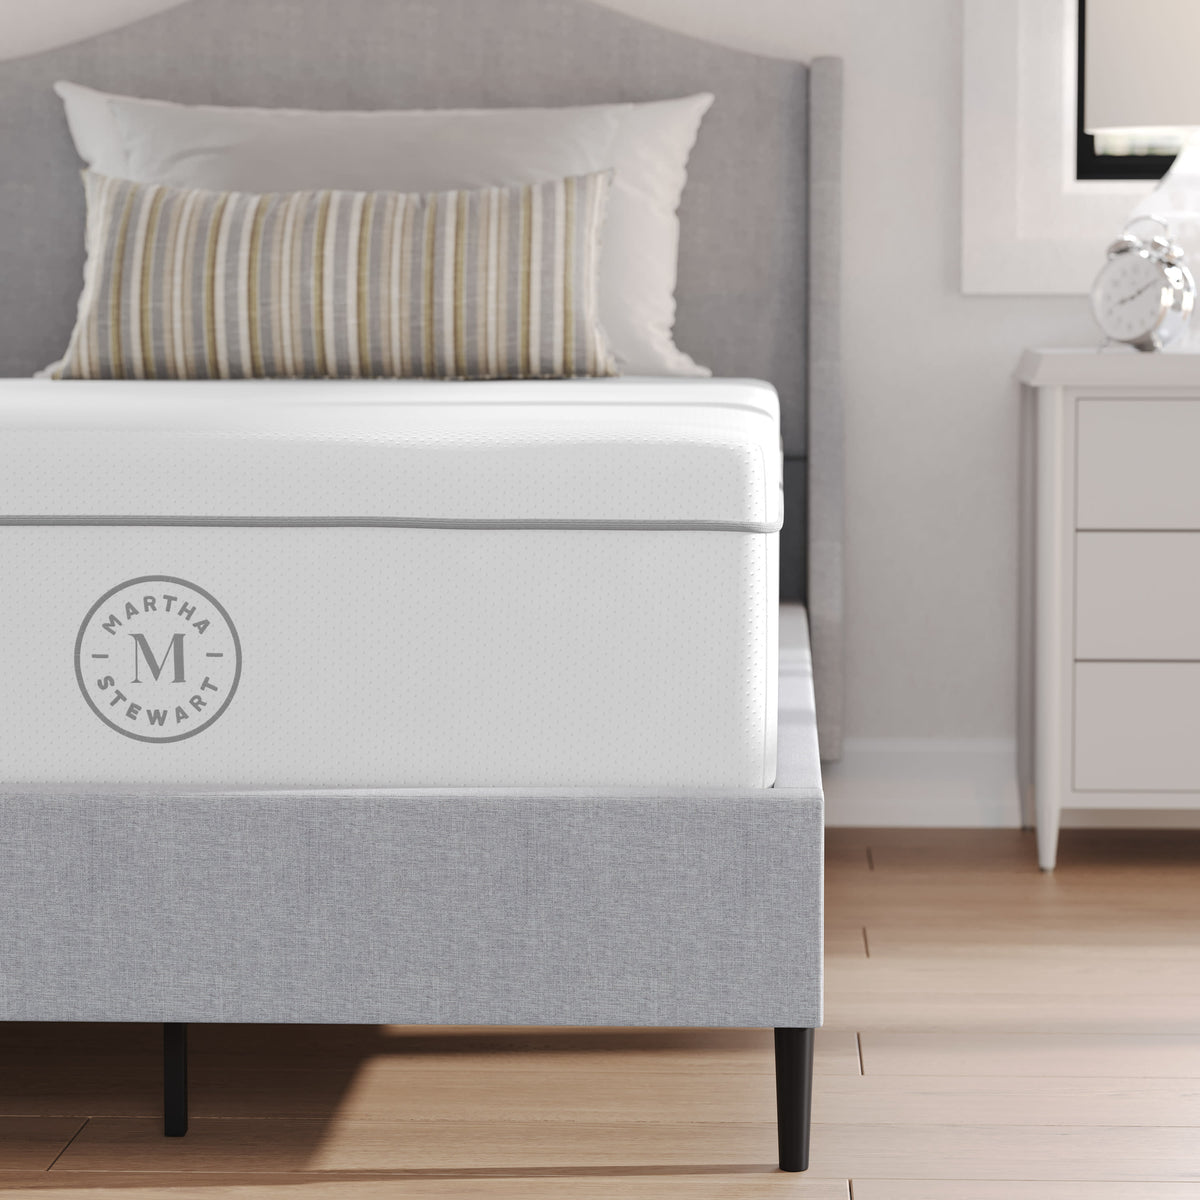 Twin |#| Firm Support Pocket Spring and Foam Hybrid Dual-Action Cooling Mattress - Twin